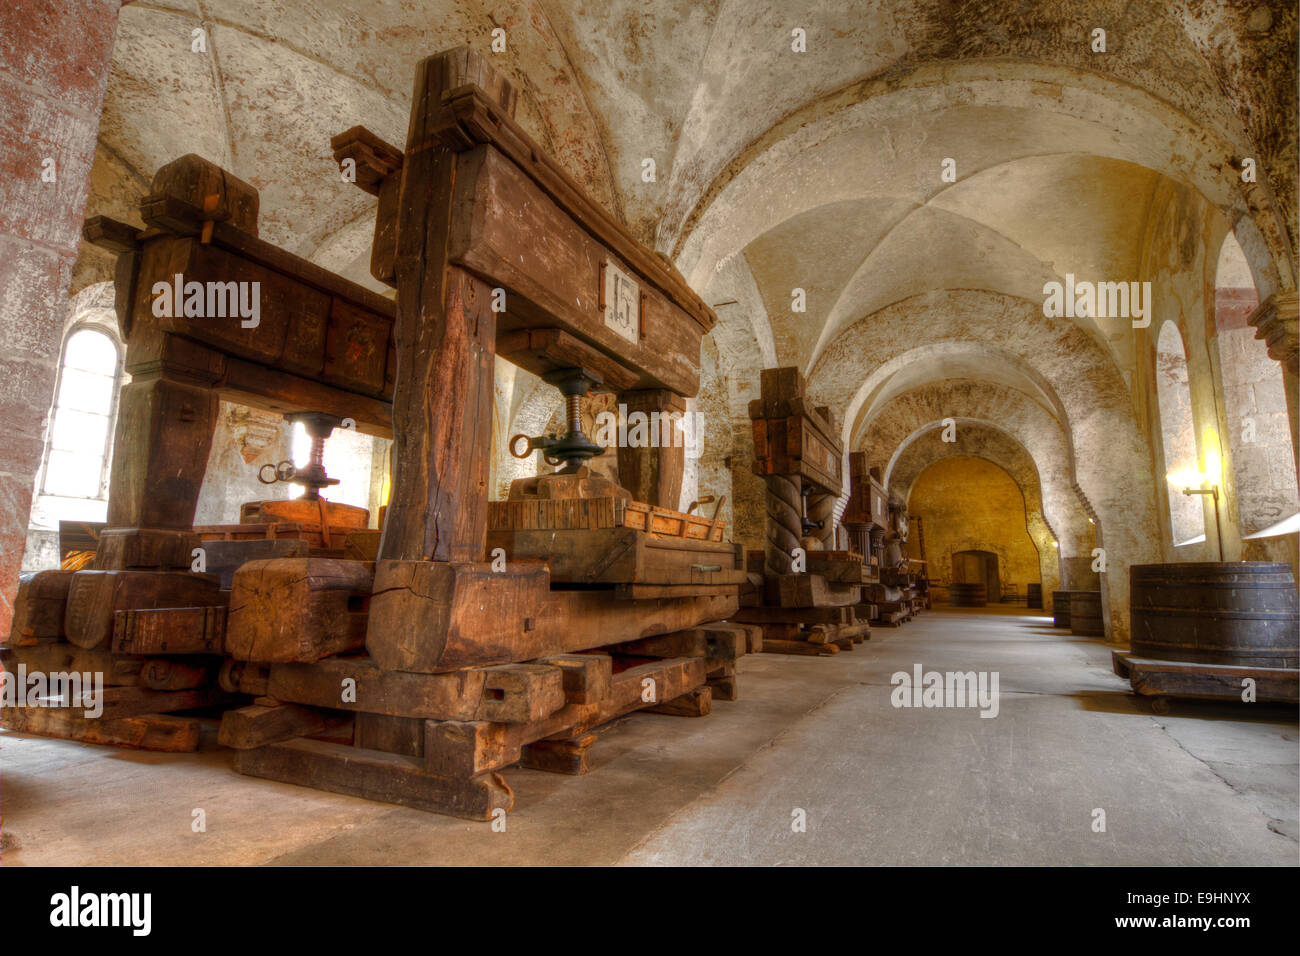 Old wine cellar at Kloster Eberbach Stock Photo